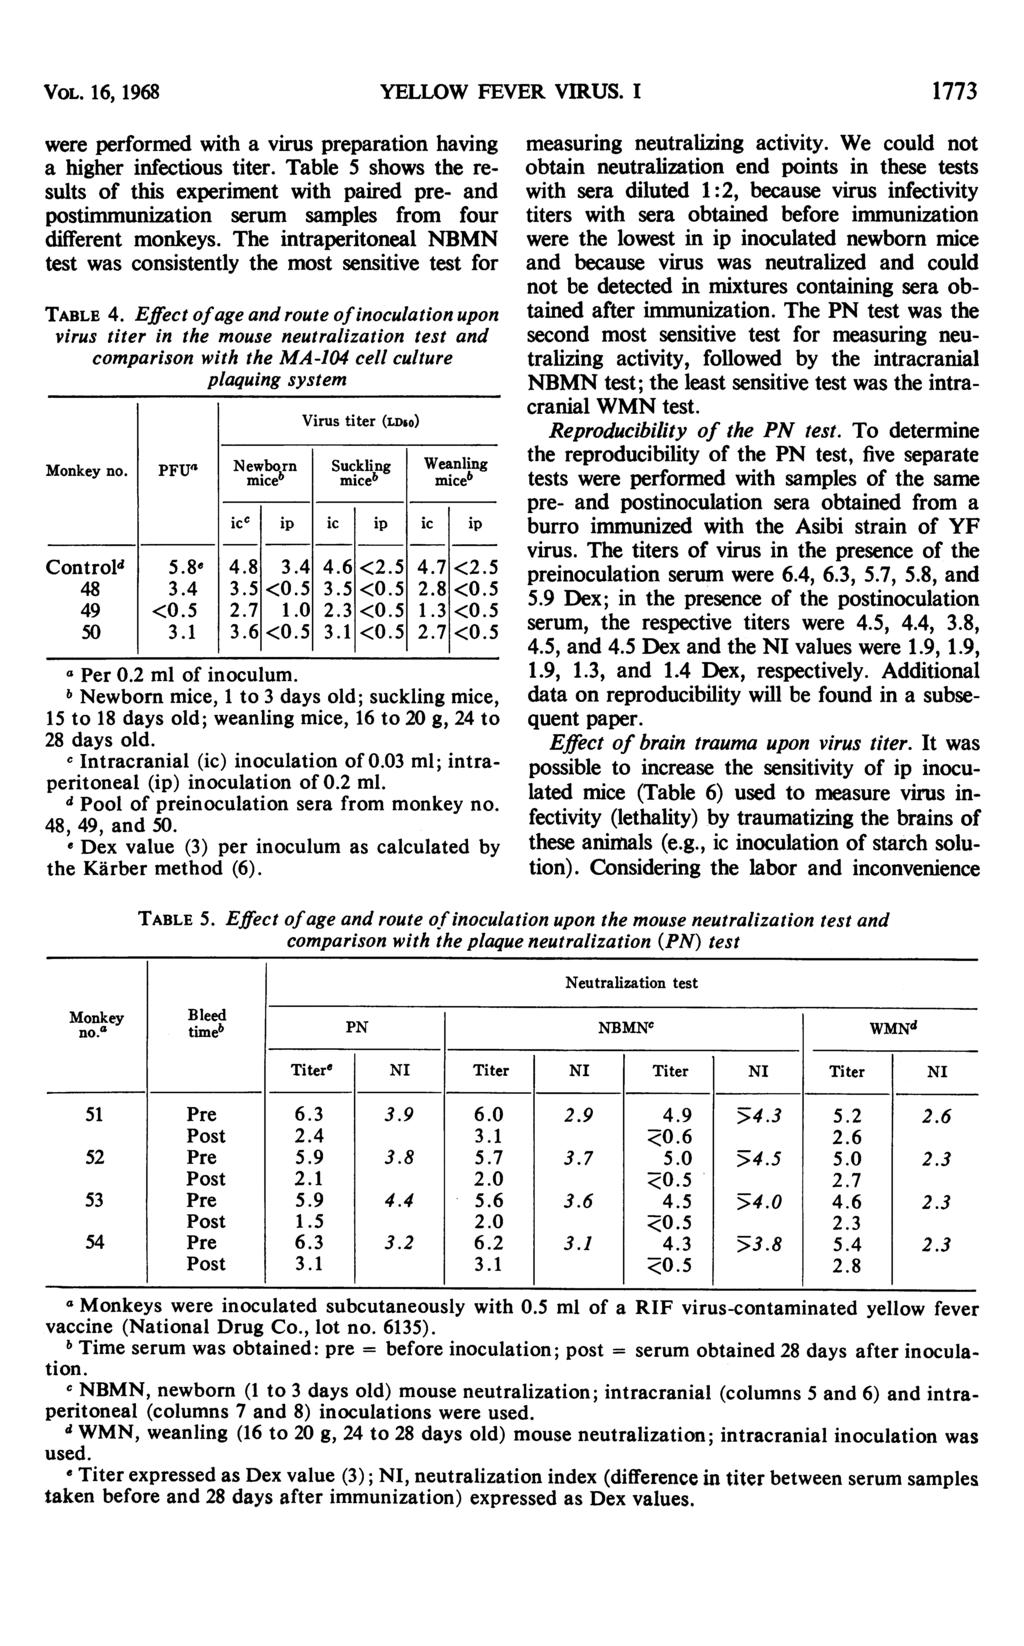 VoL. 16, 1968 were performed with a virus preparation having a higher infectious titer.